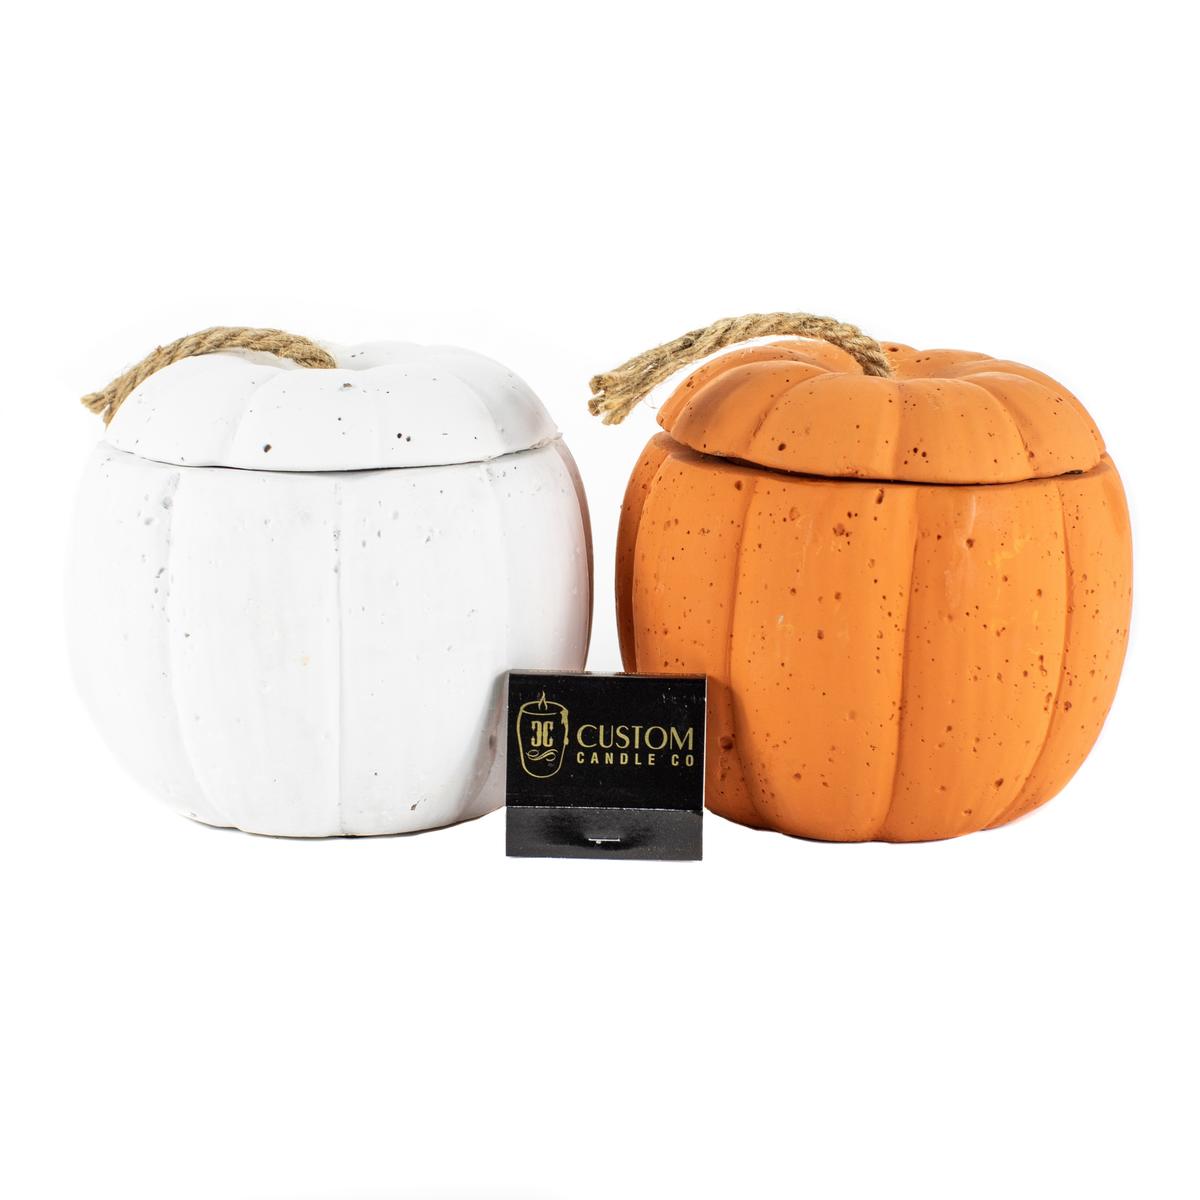 Two Pumpkin Cement Candles - one white and one orange